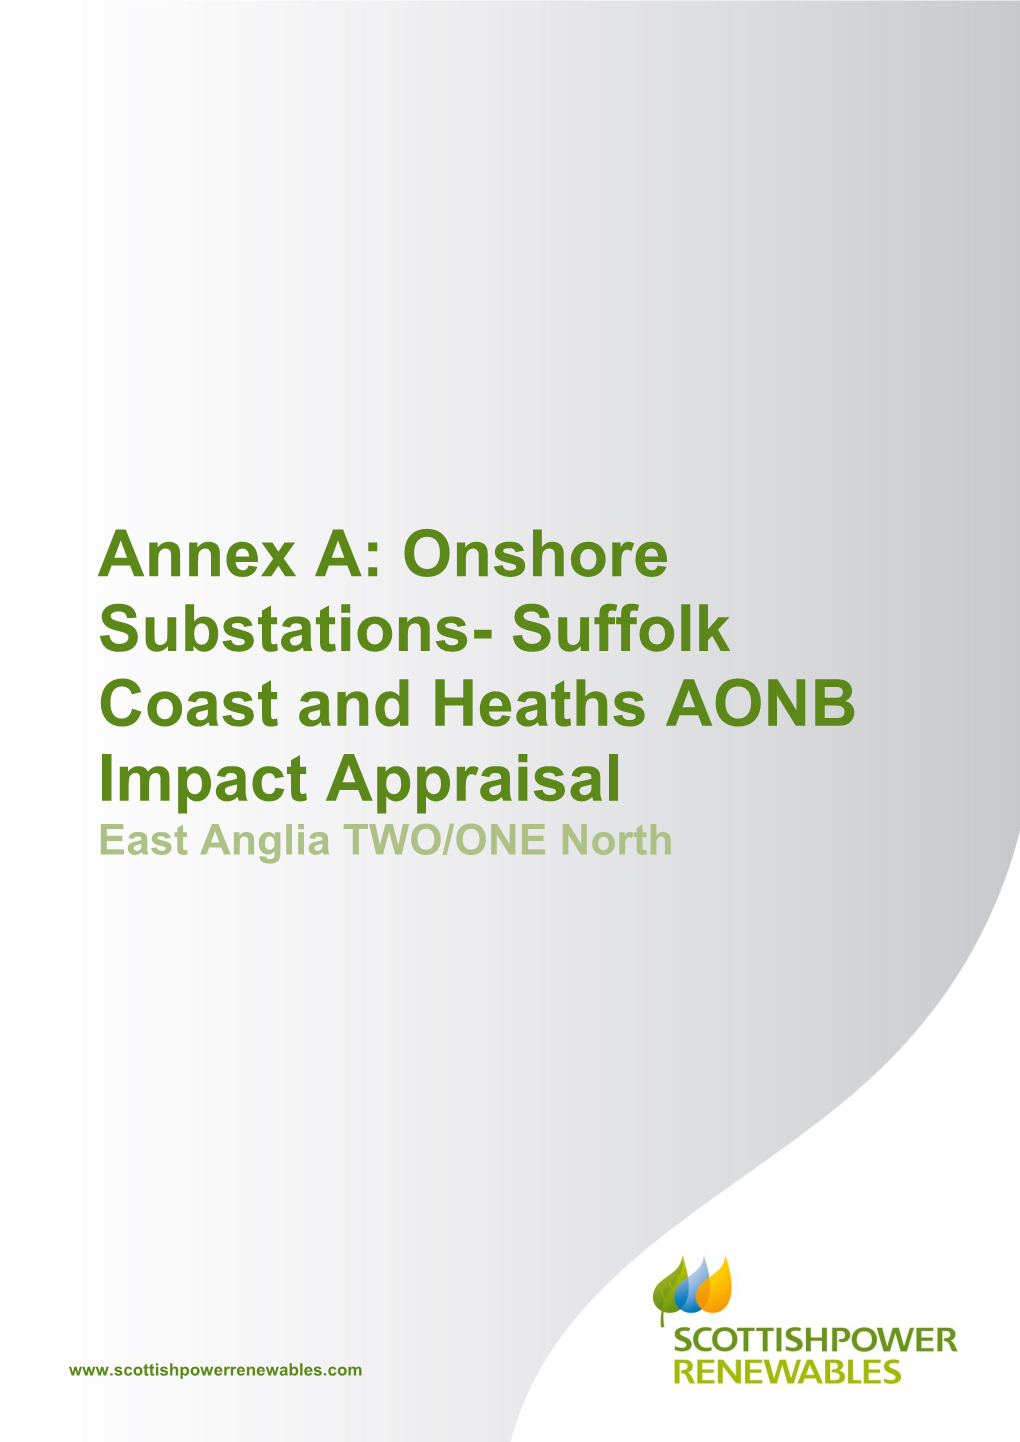 Onshore Substations- Suffolk Coast and Heaths AONB Impact Appraisal East Anglia TWO/ONE North